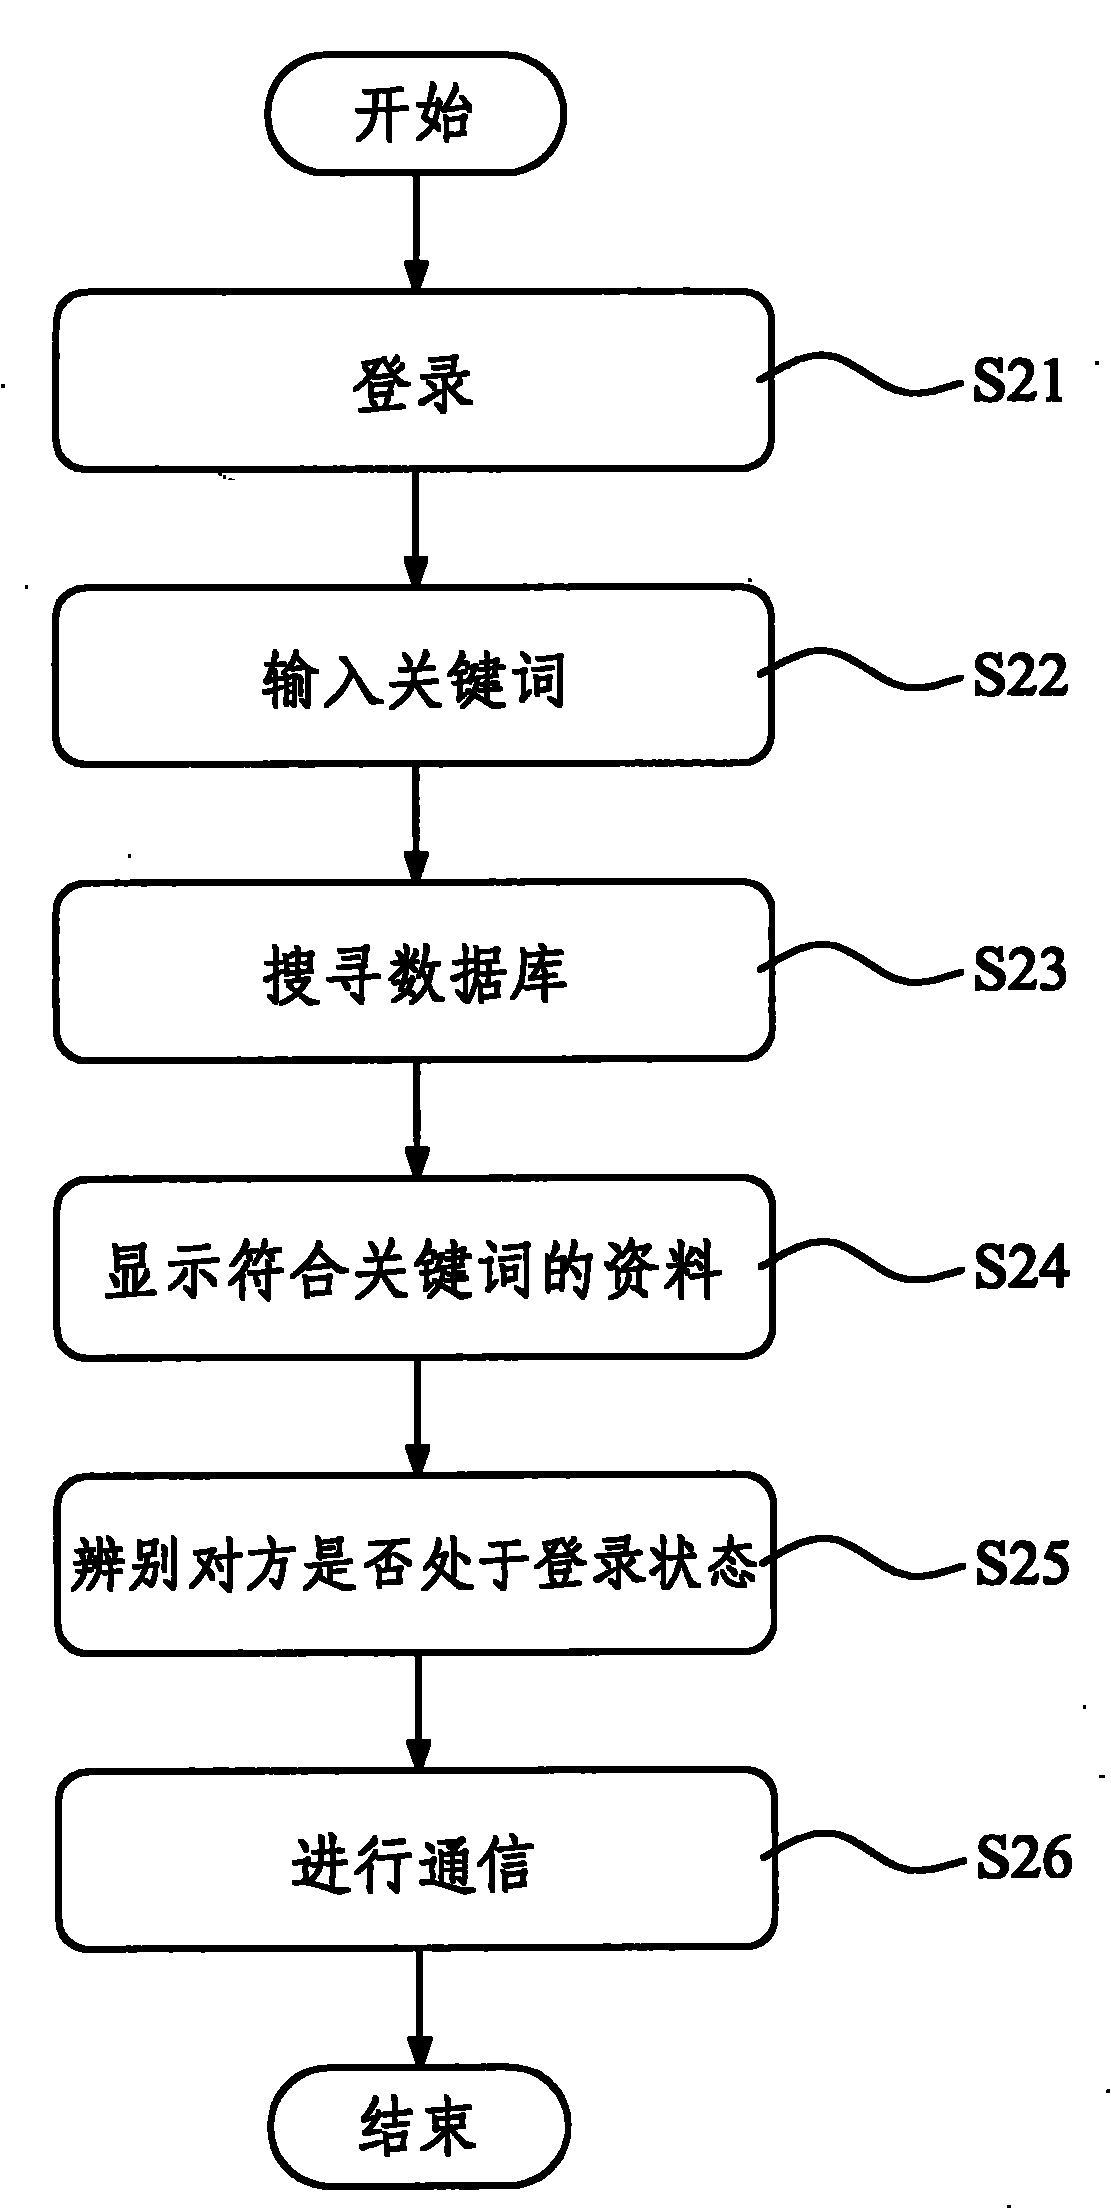 Method for instant interactive network article transaction